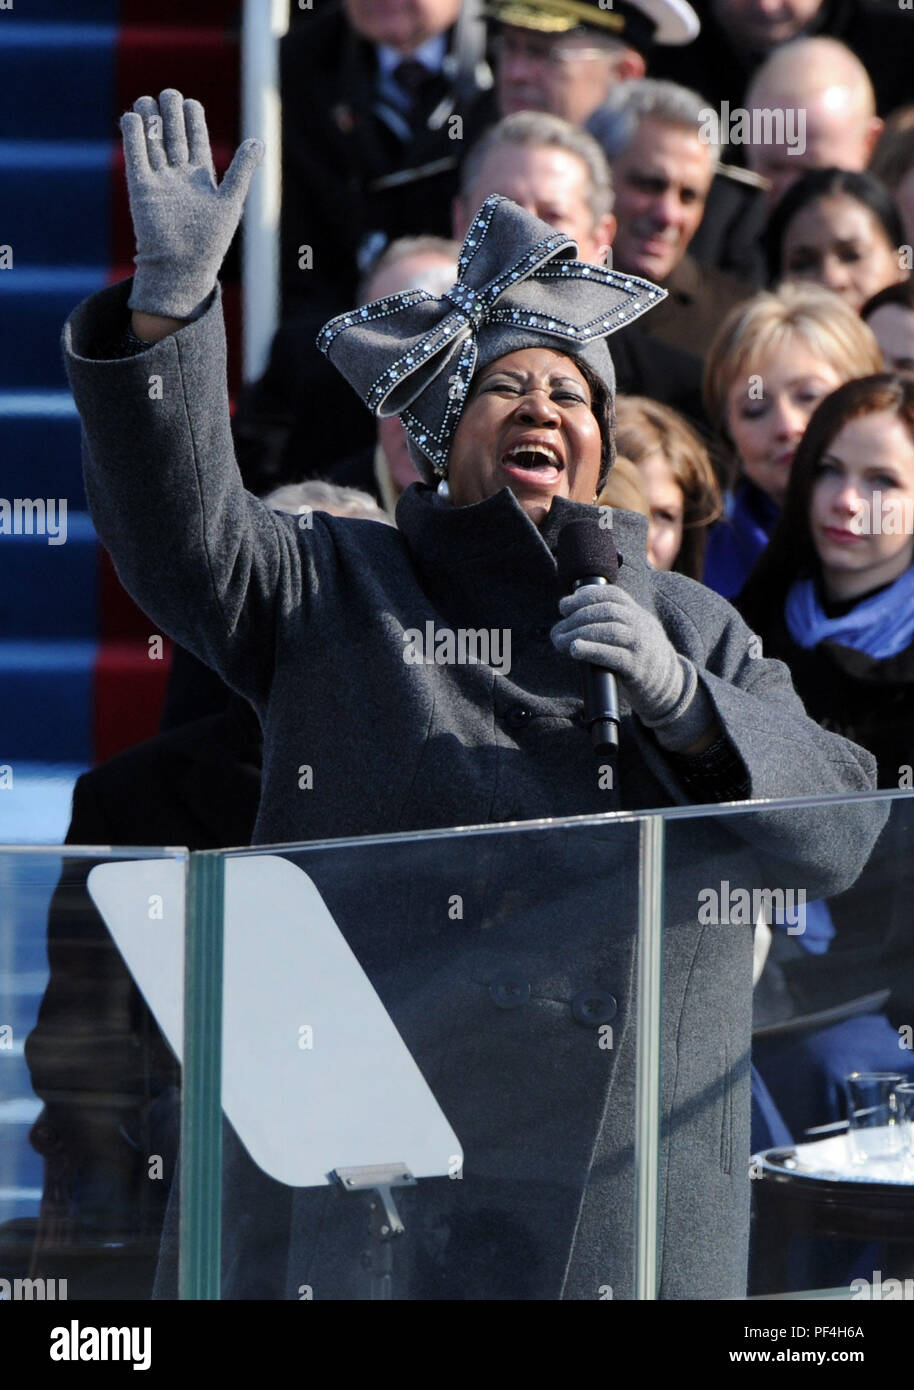 January 21, 2009 - Washington, District of Columbia, U.S.: American legendary sInger ARETHA FRANKLIN performs at the the Presidential Inauguration ceremony for Obama as the 44th President of the United States. Credit: Pat Benic-POOL/CNP/ZUMA Wire/Alamy Live News Stock Photo